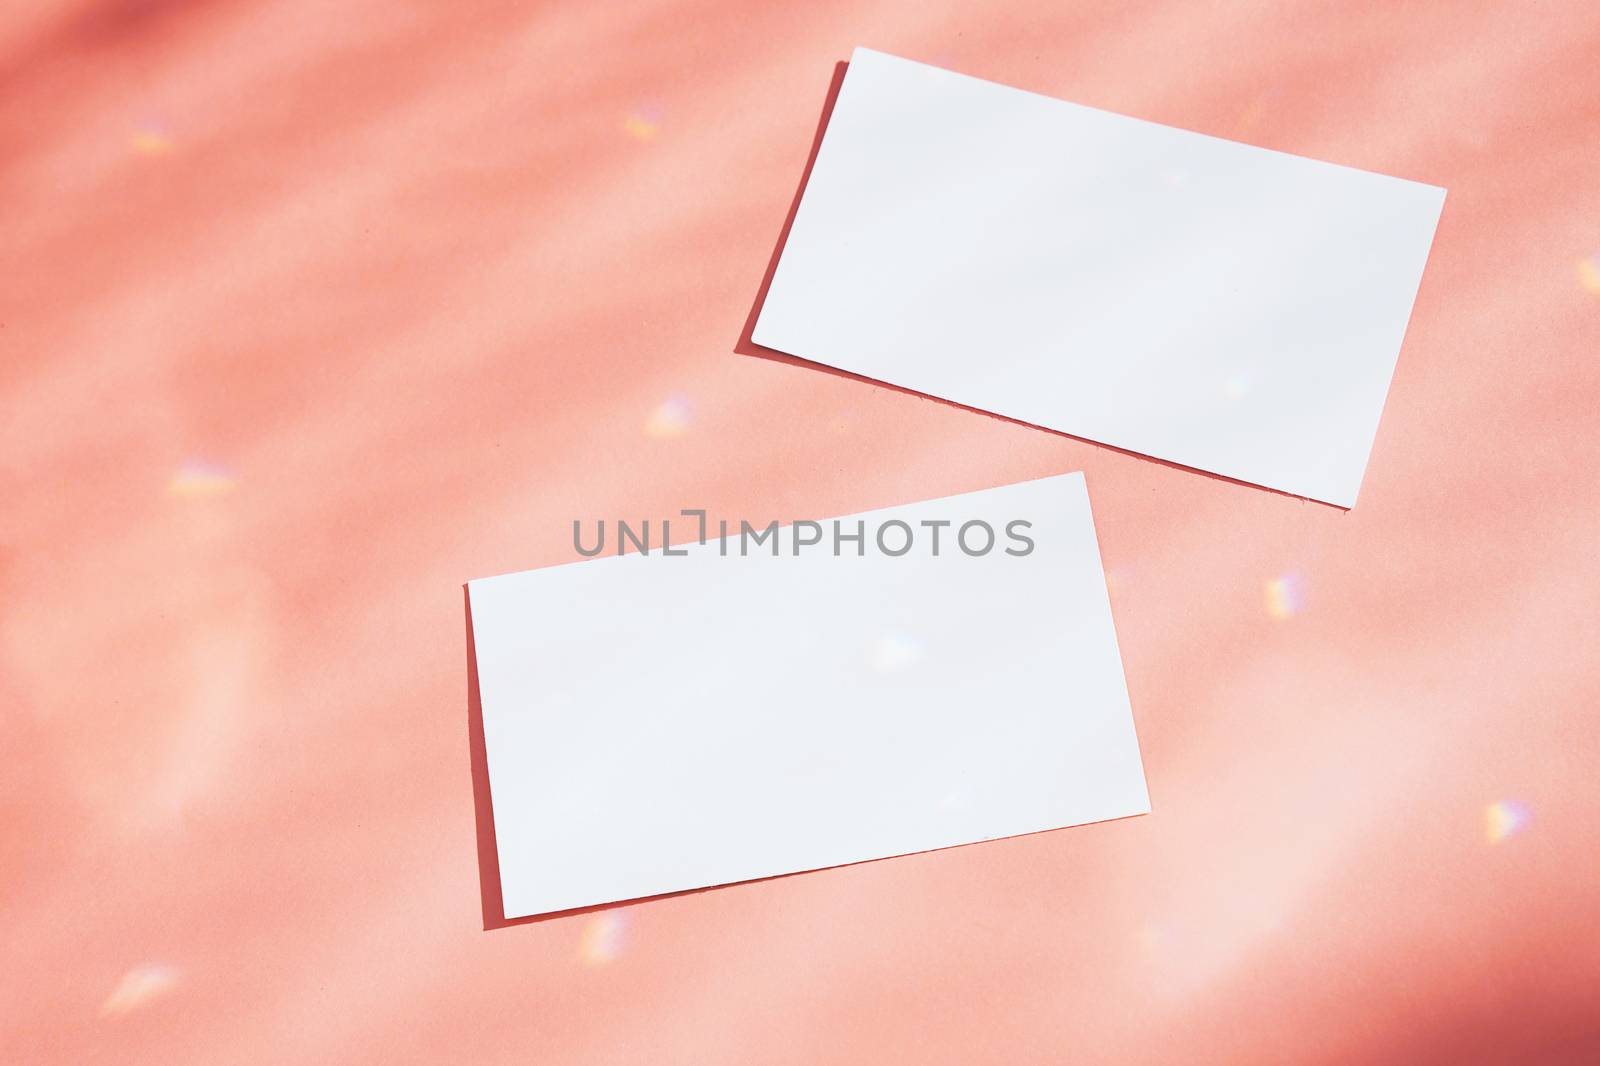 Flat lay of branding identity business name card on orange background with sparkle light and shadow, minimal design